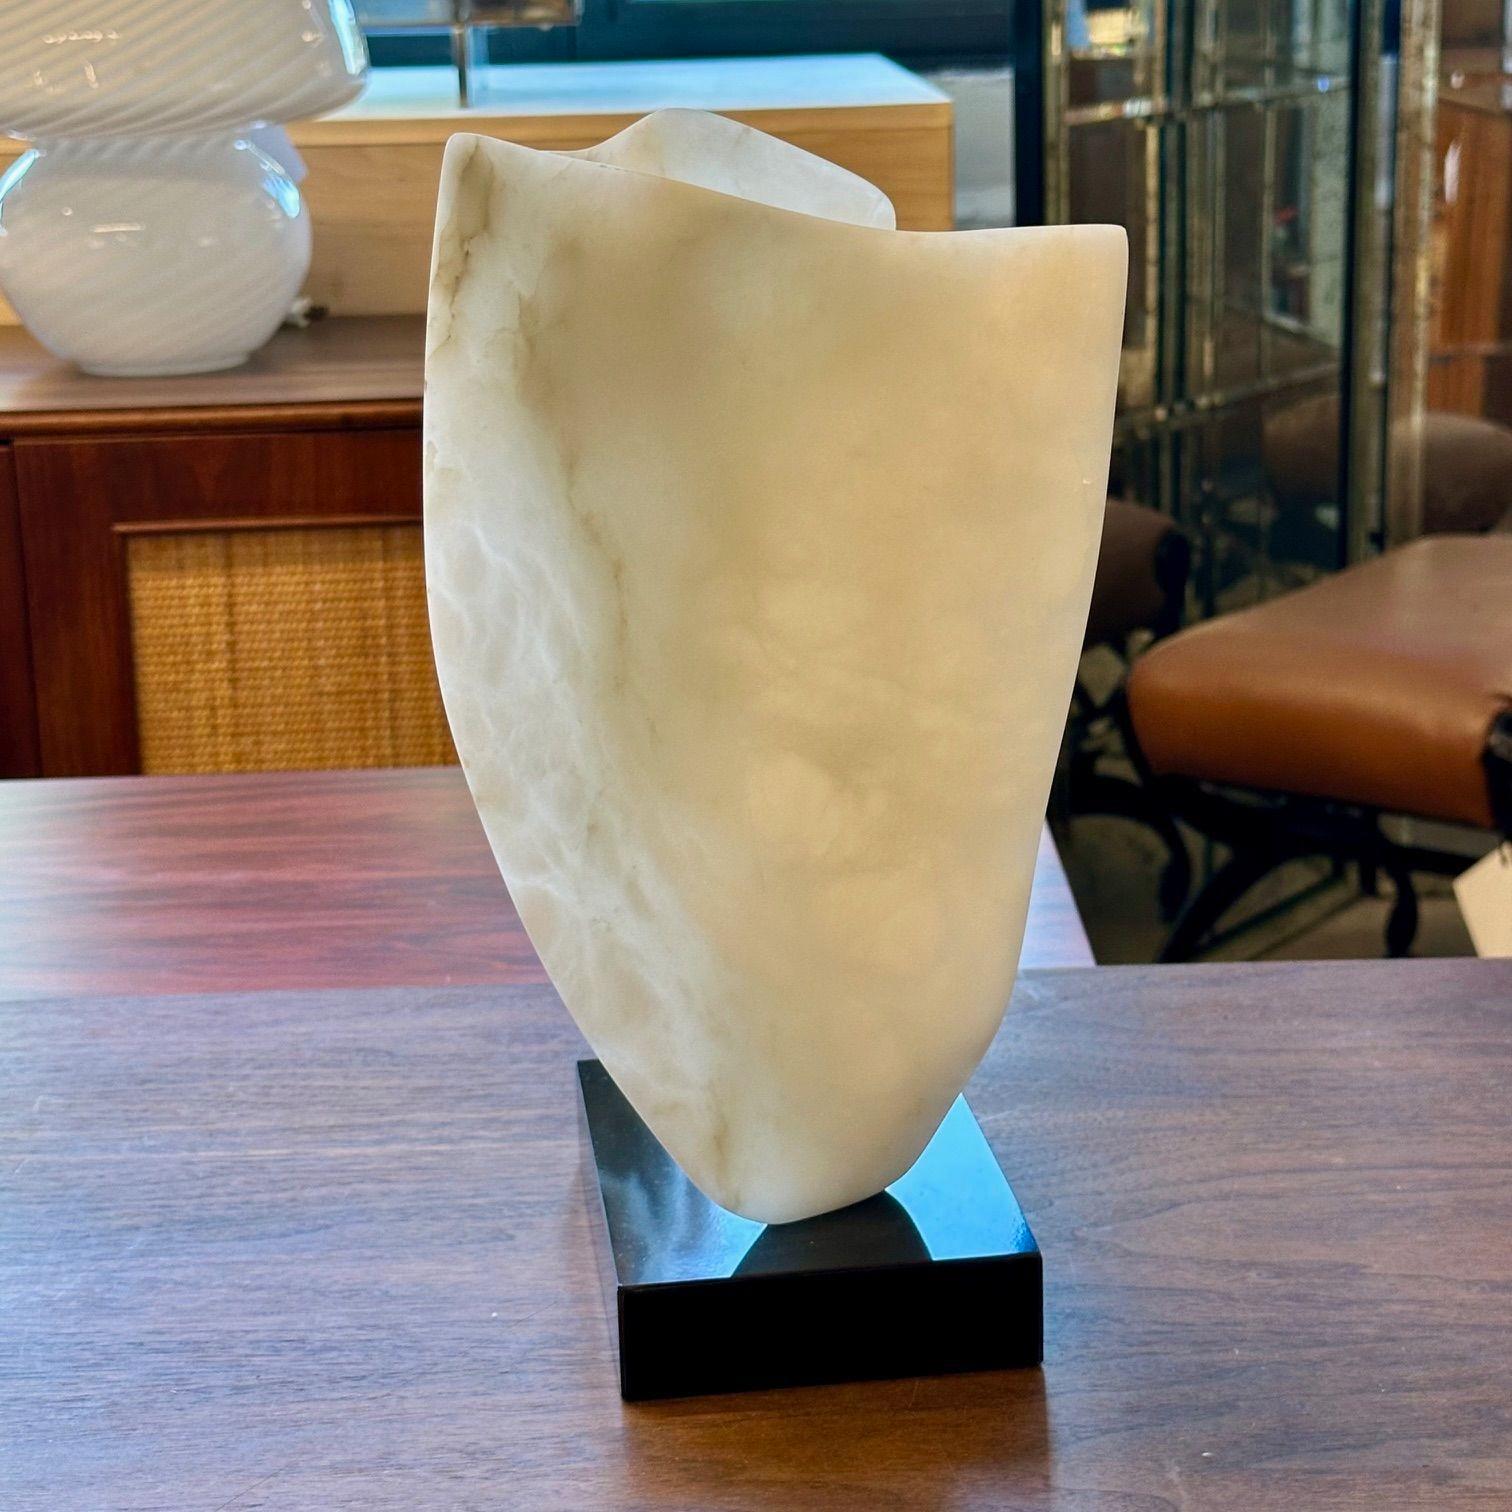 Contemporary Abstract Stone / Marble Sculpture on Base, Organic Form, 1990er Jahre (Stein) im Angebot